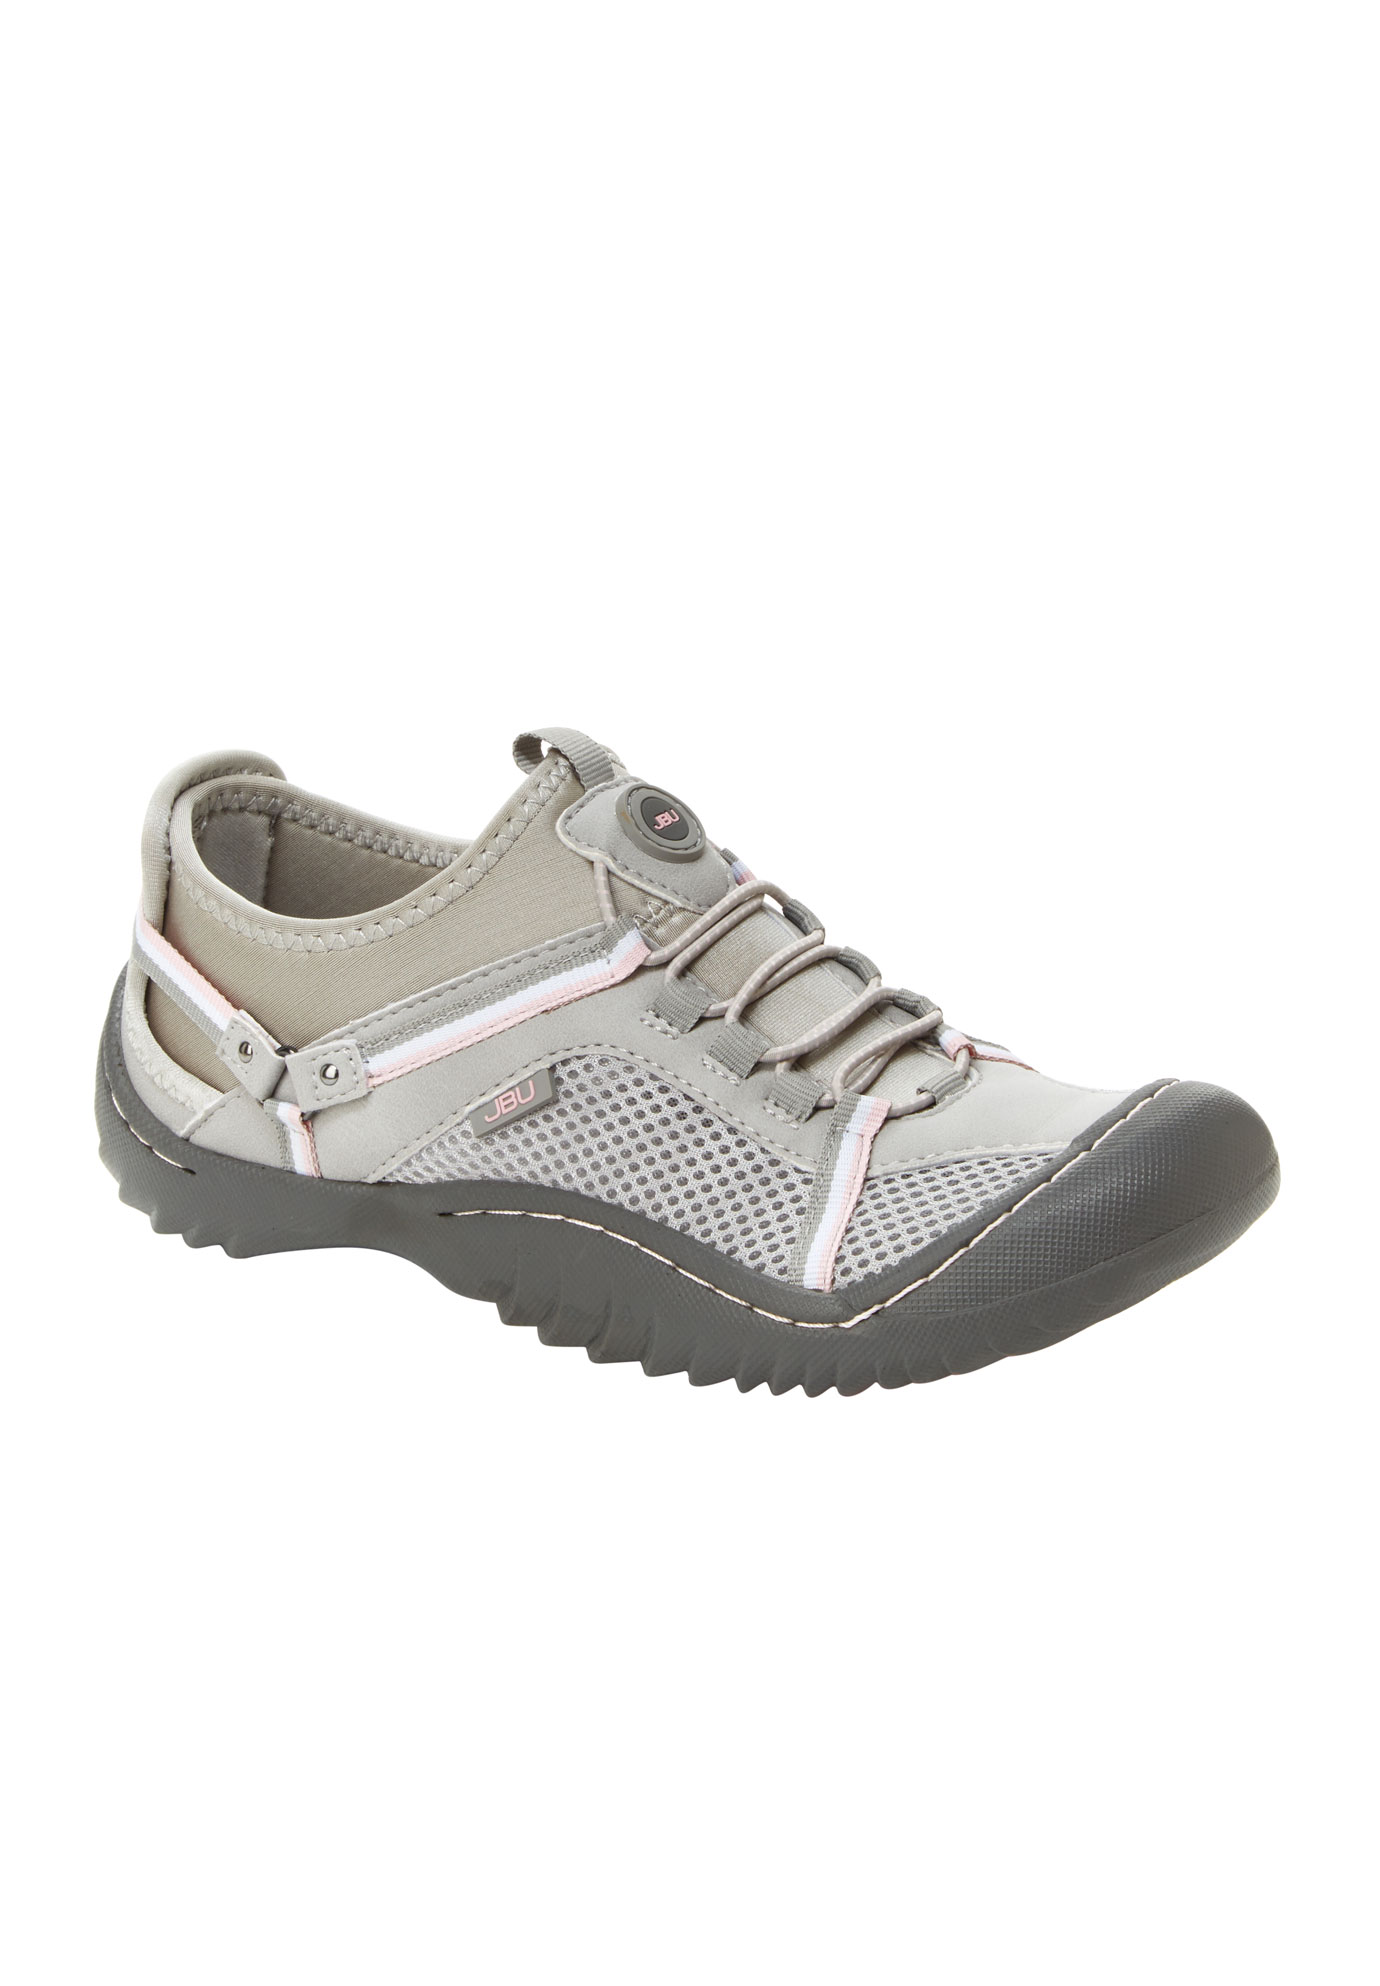 Tahoe Max Sneakers by JBU®| Plus Size Sneakers | Woman Within